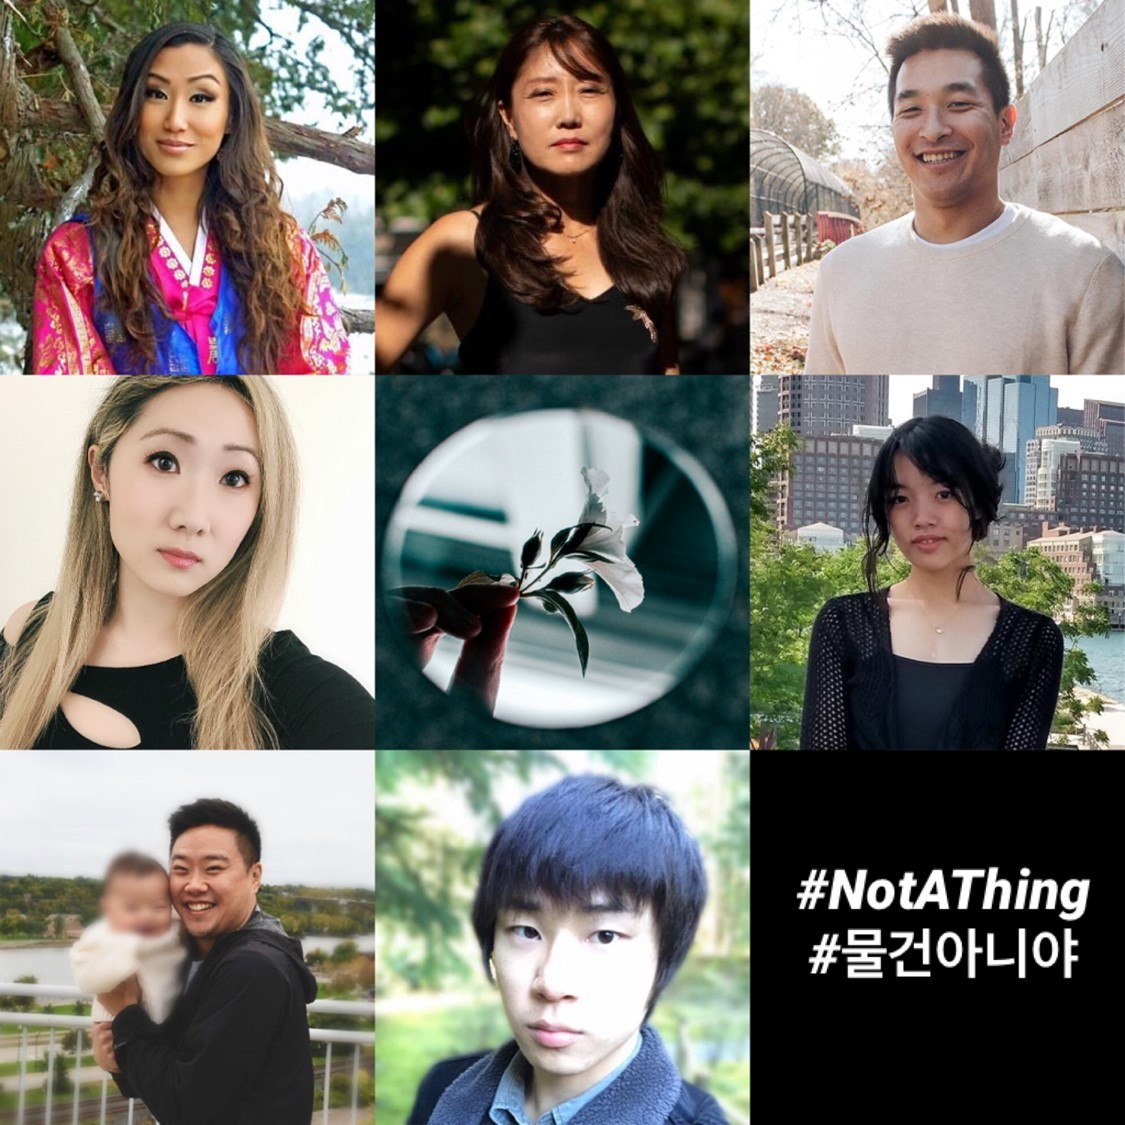 A group of South Korean adoptees launched a social media movement in 2021 with the hashtags #NotAThing. The graphic was made by Valerie Reilly. Petition: Kara Bos, Kevin Omans, Liat Shapiro, Cam Lee, Allison Park, Brenna McHugh and Patrick Armstrong